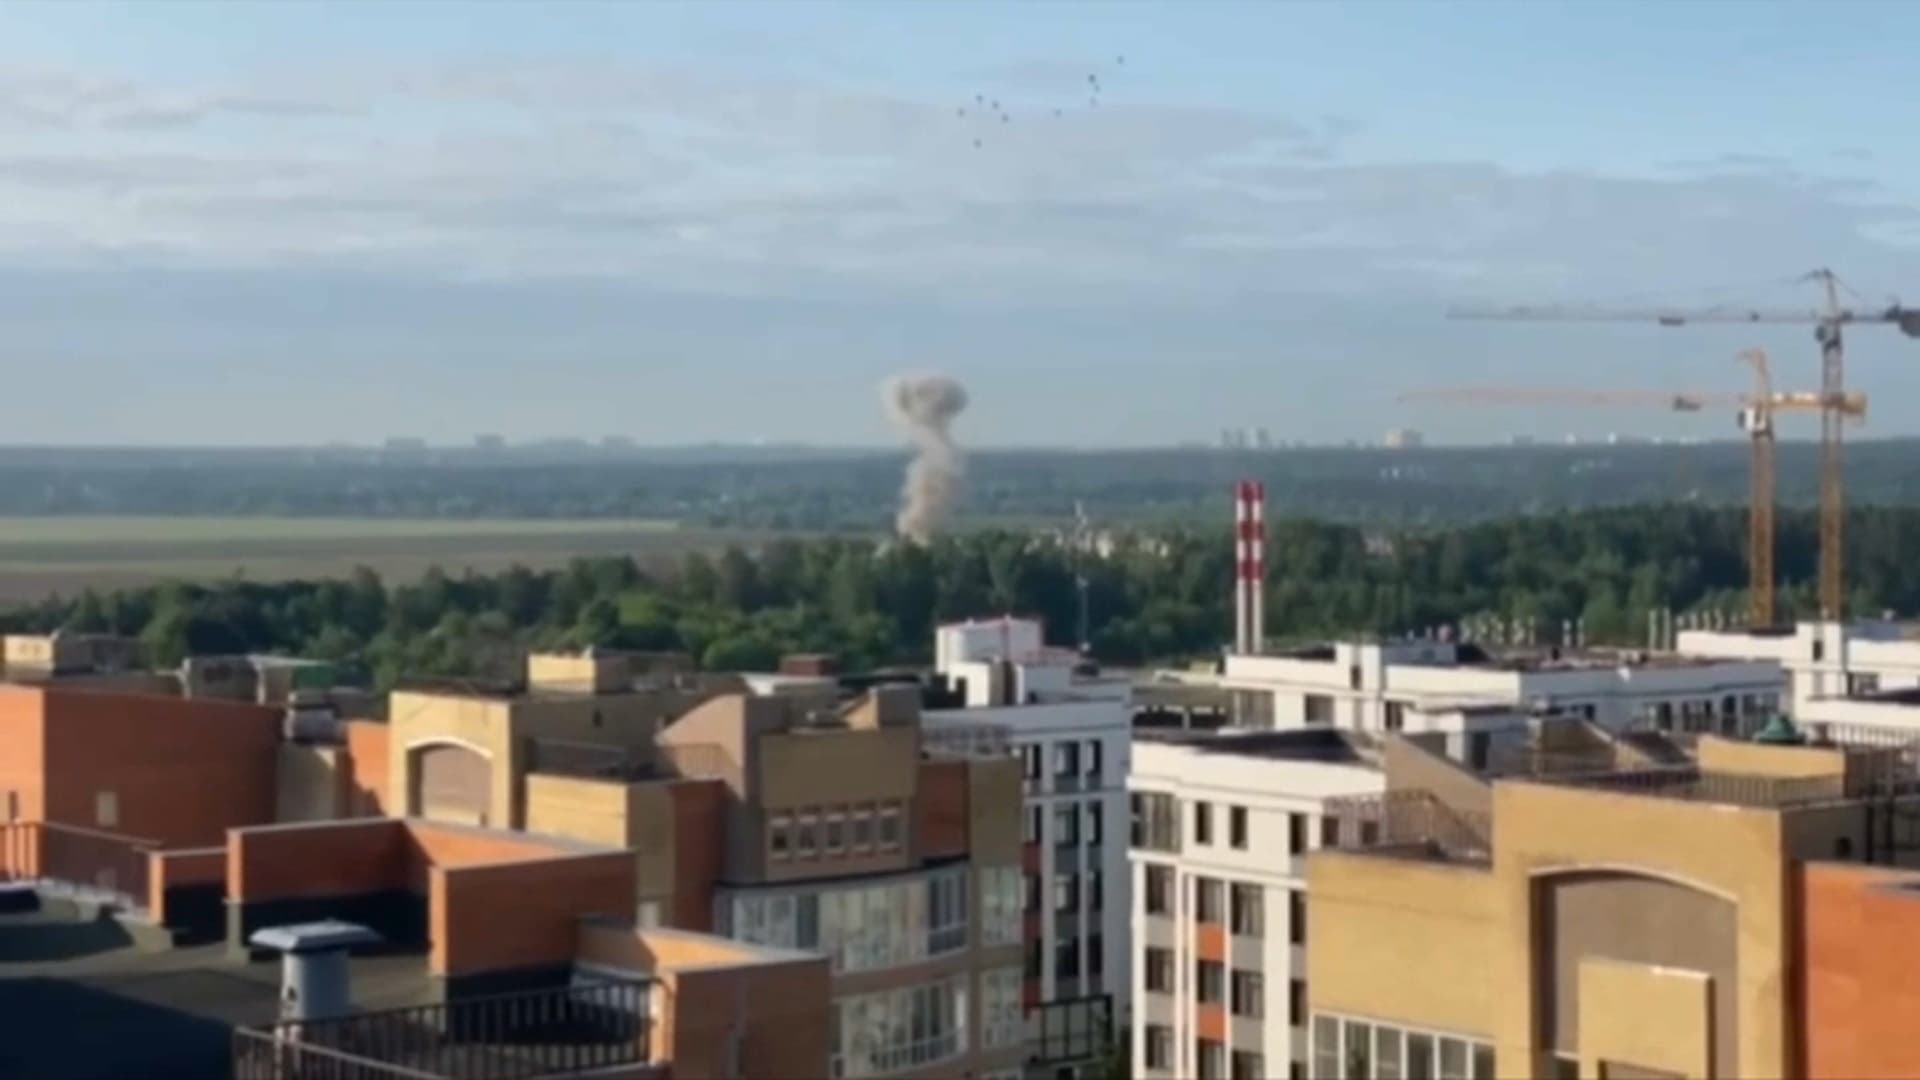 LIVE – Drones over Moscow: For Kremlin, attack is “a response” to recent Russian strikes from Kiev